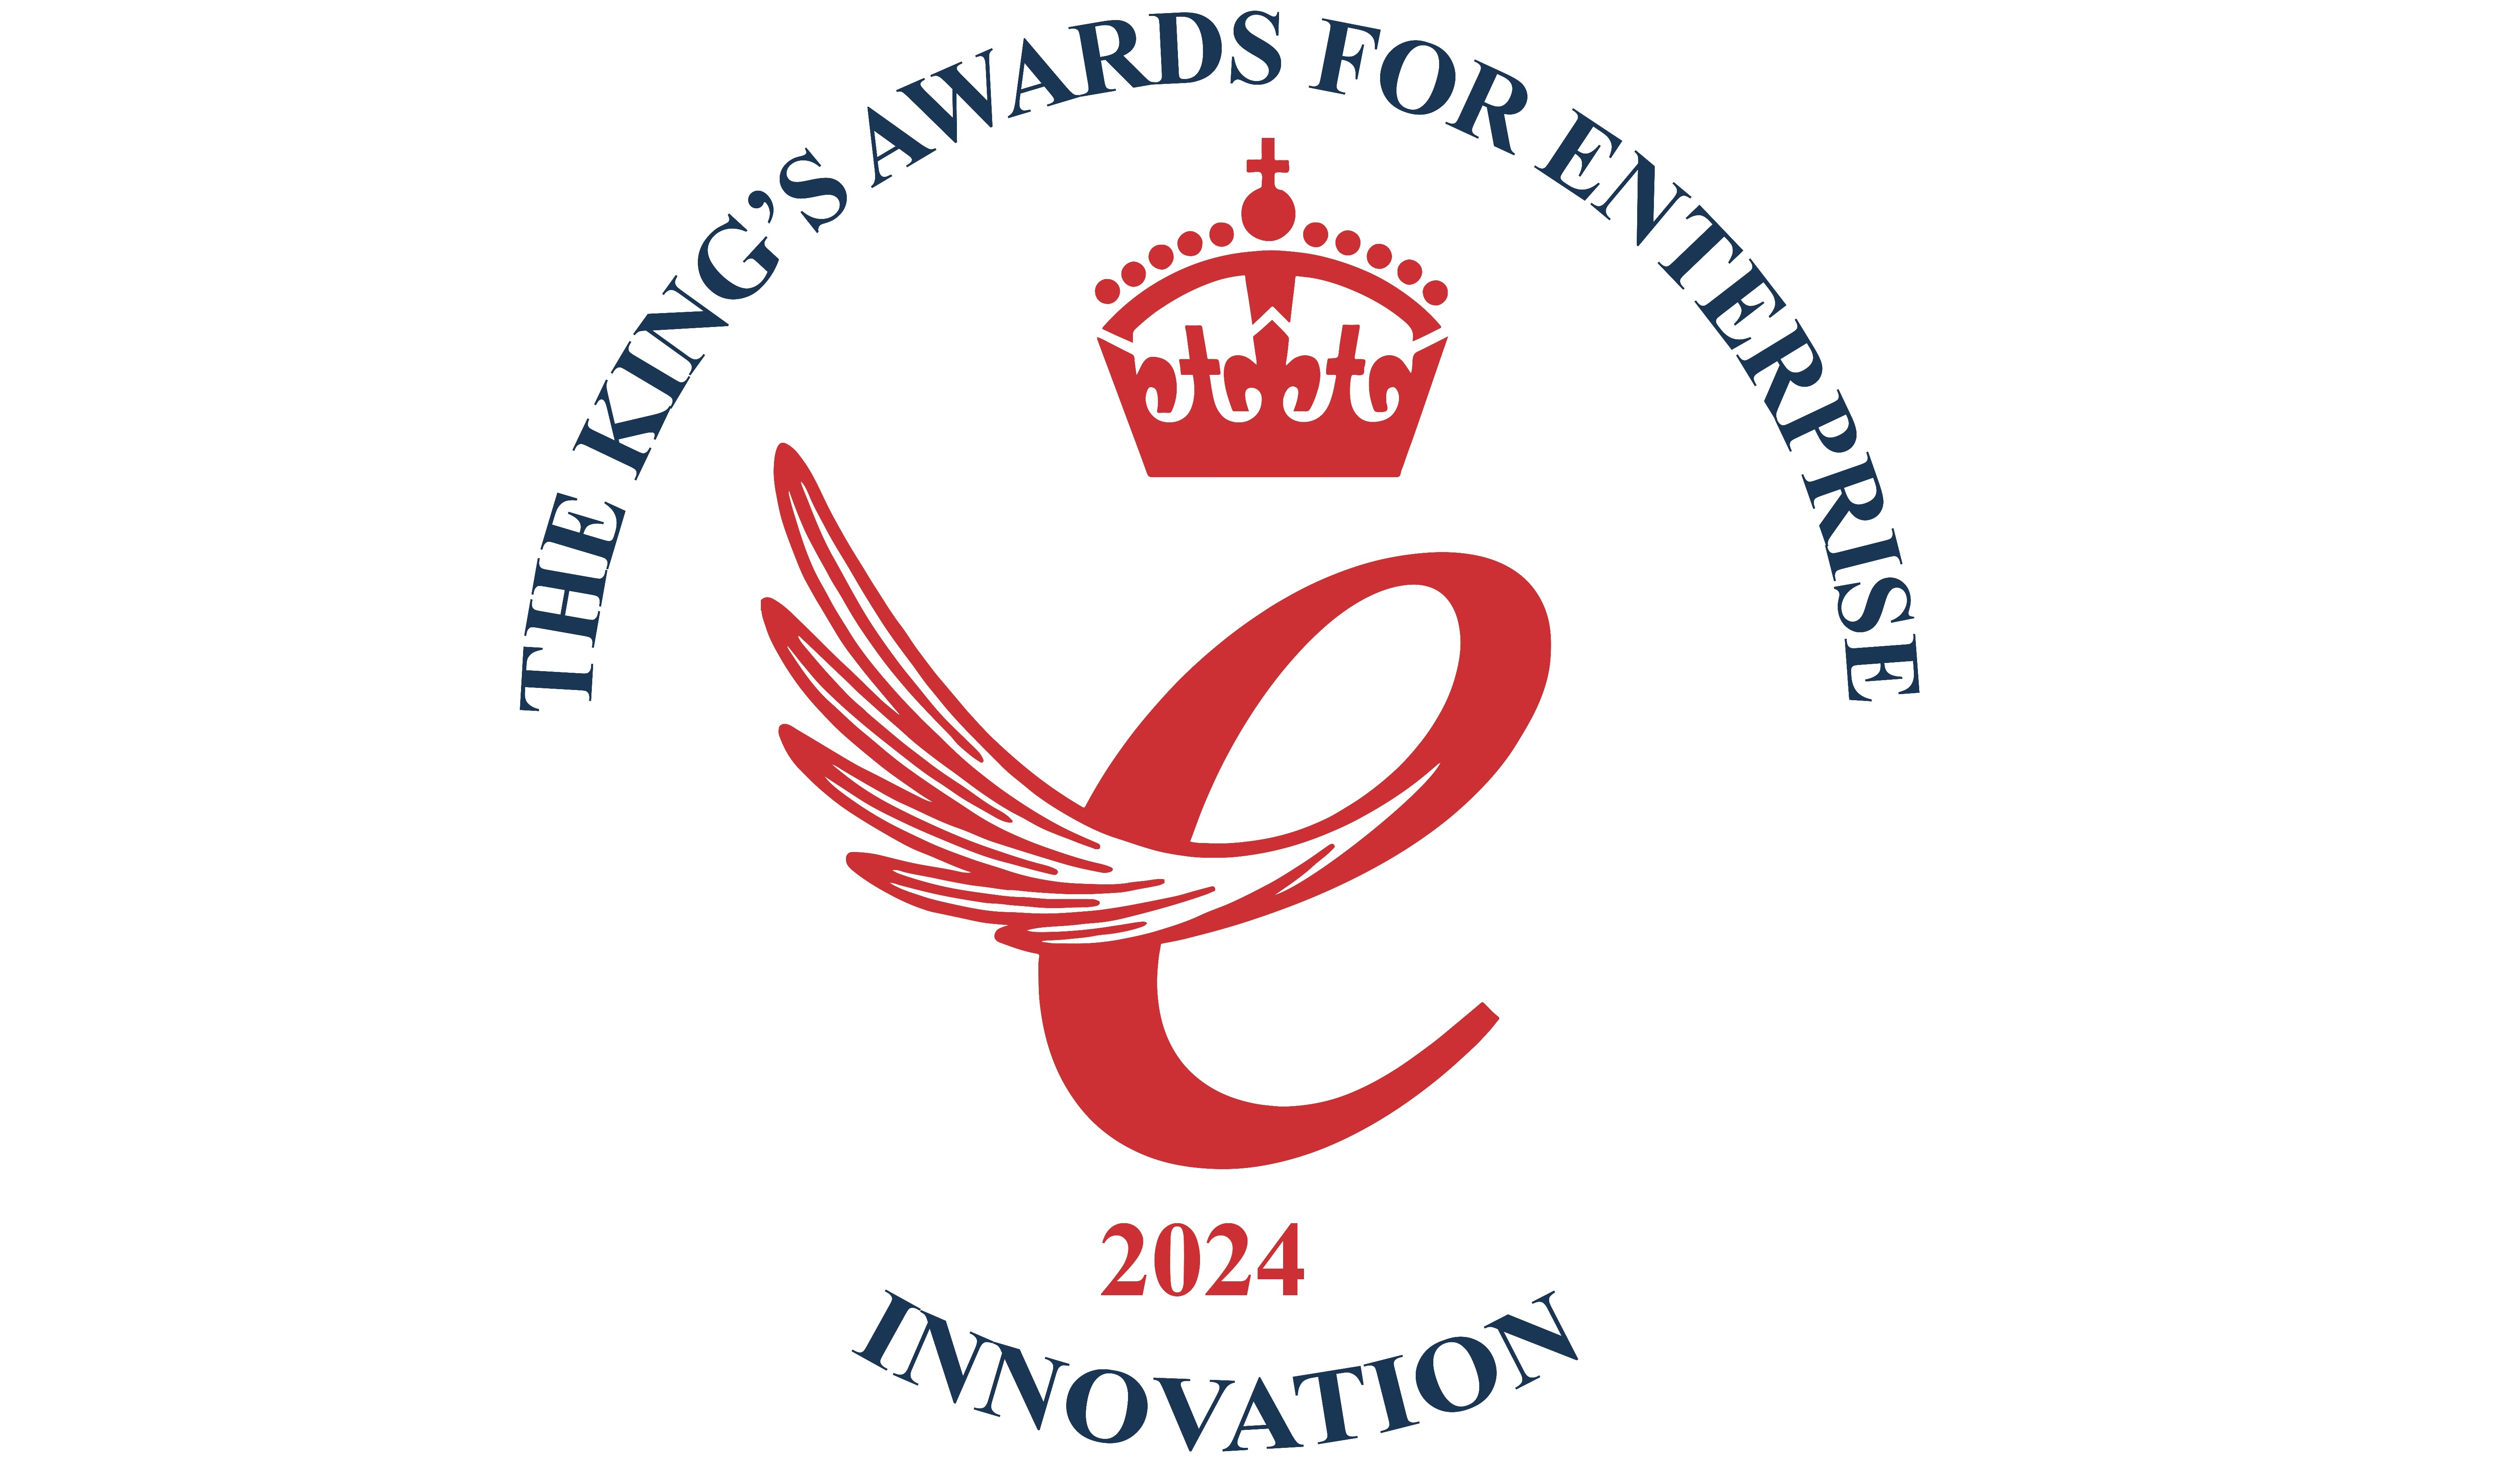 British businesses celebrated in The King’s Awards for Enterprise